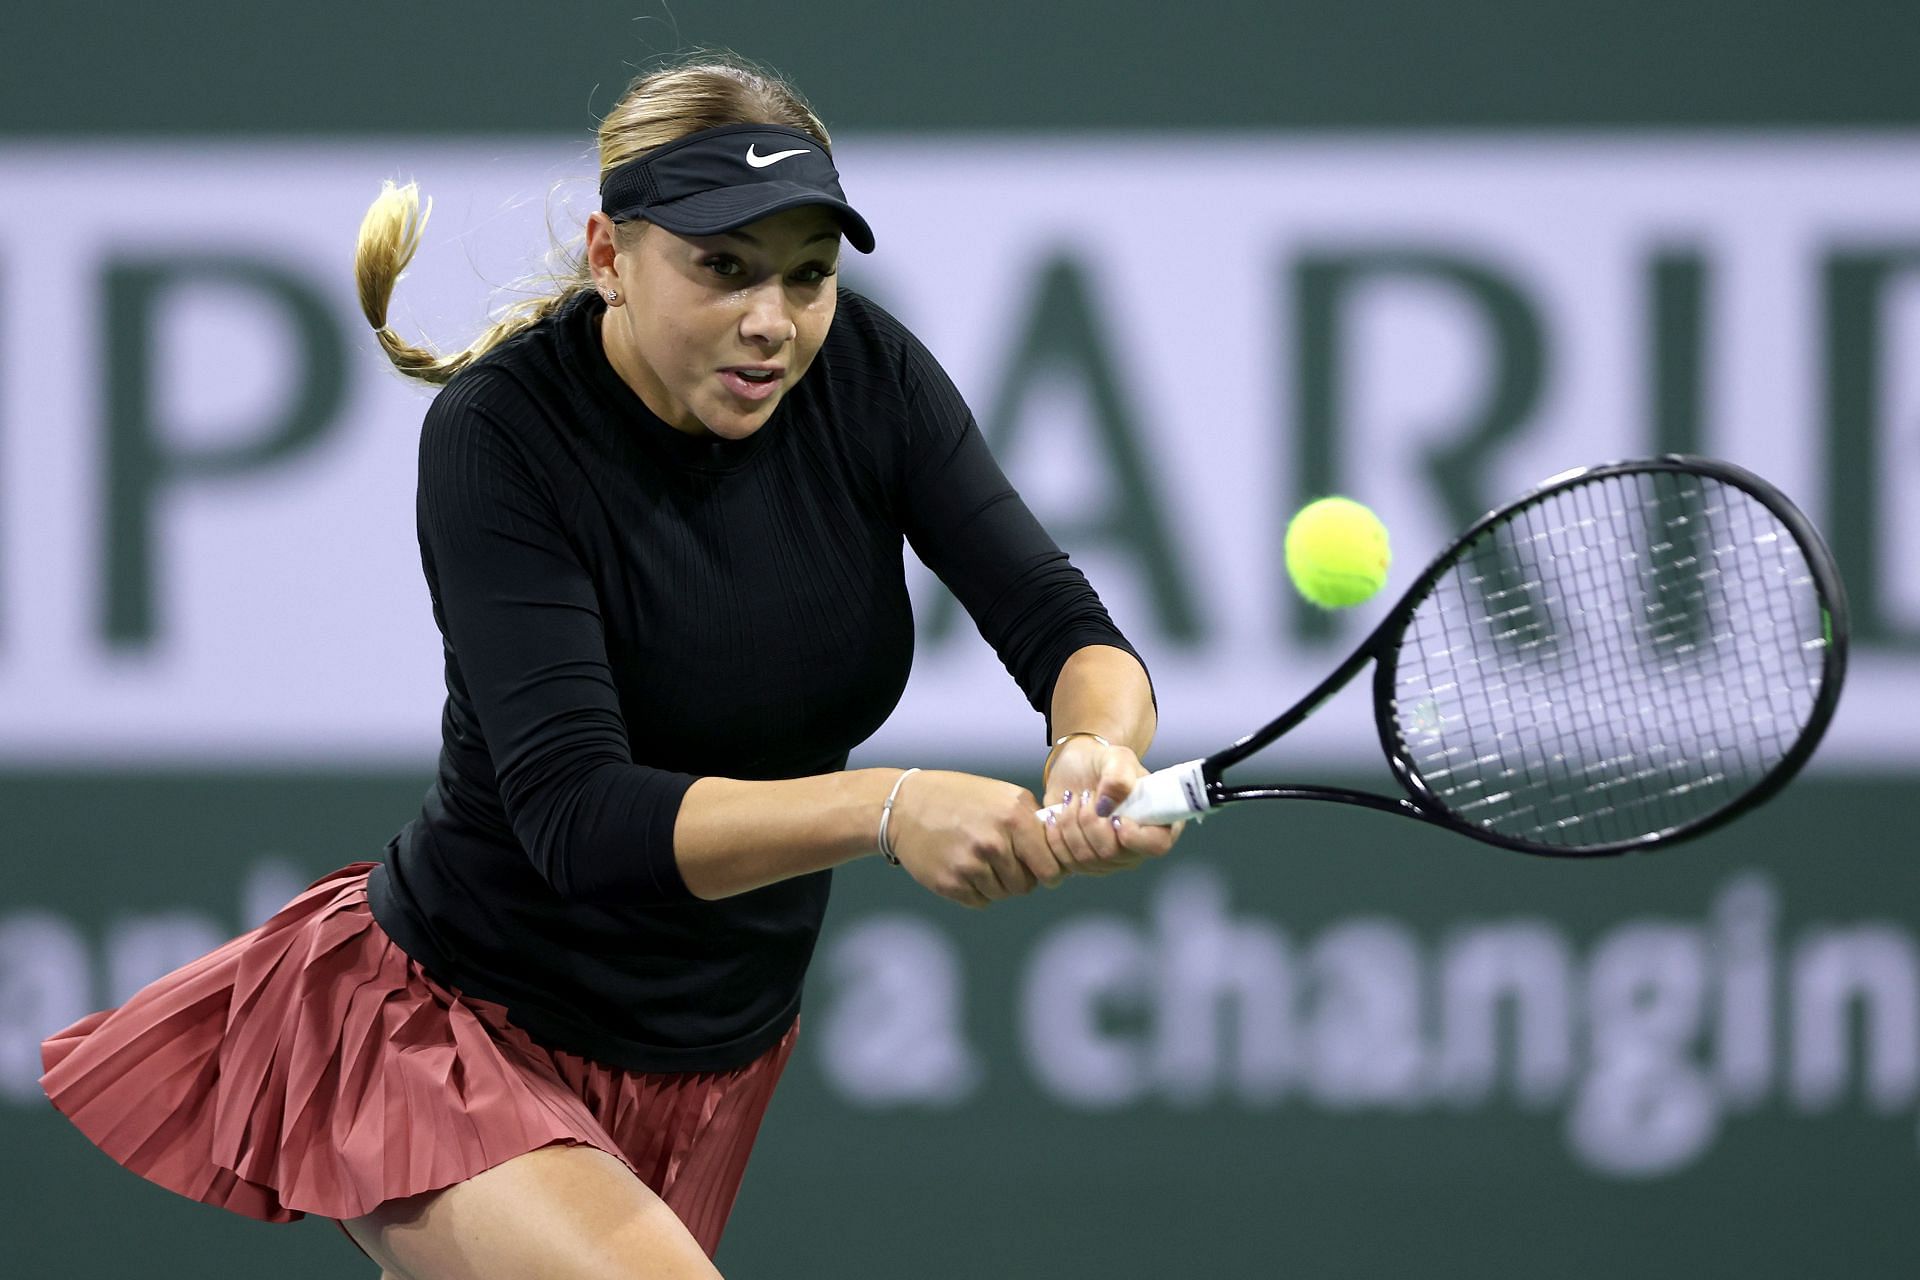 Anisimova will be determined to make a deep run at the Miami Open